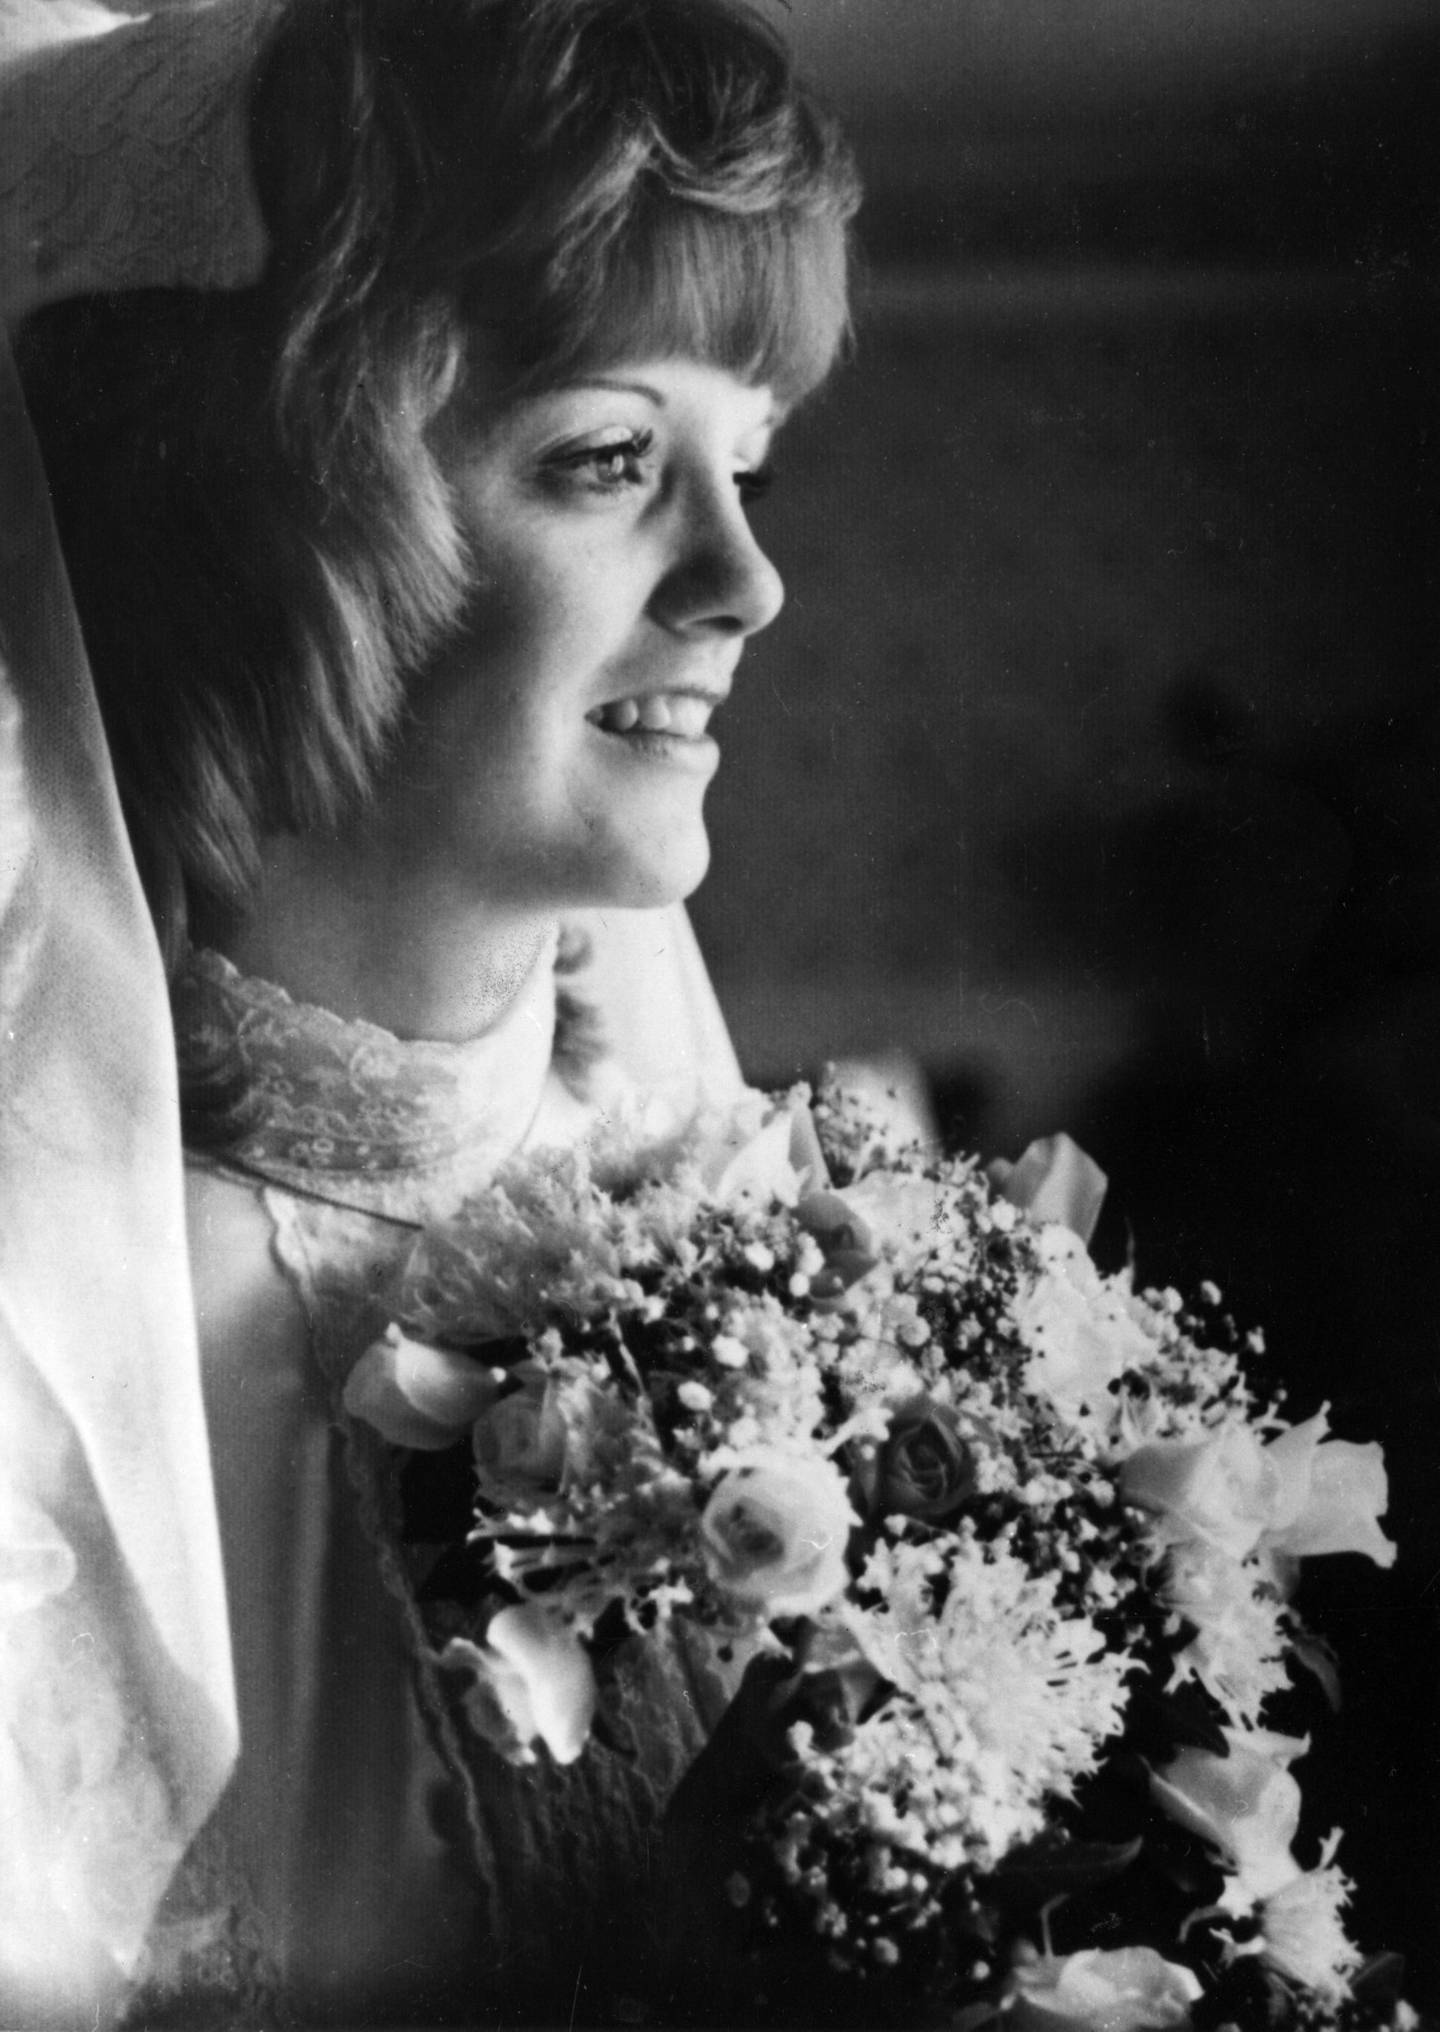 Mary McFarland, shown in her April 1974 wedding photo, died from taking Tylenol capsules tainted with cyanide in 1982. 